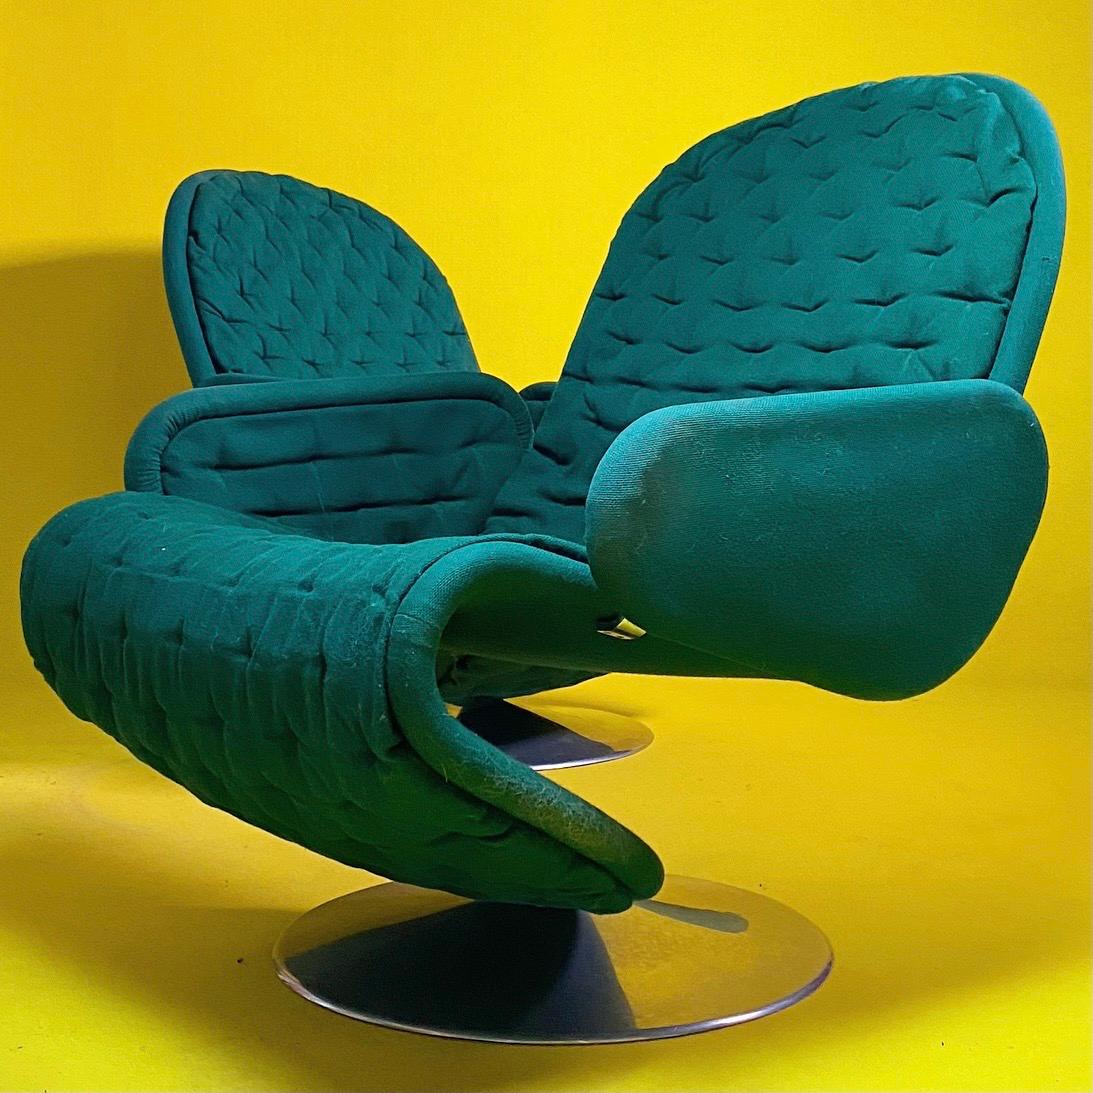 Verner Panton 1-2-3 Deluxe set of two chairs for Fritz Hansen, Denmark, early 1970s.
 
Low back 1-2-3 Deluxe with armrest both fully original with bottle green colored fabric.

Patinated with age-related signs. no structural issues whatsoever.